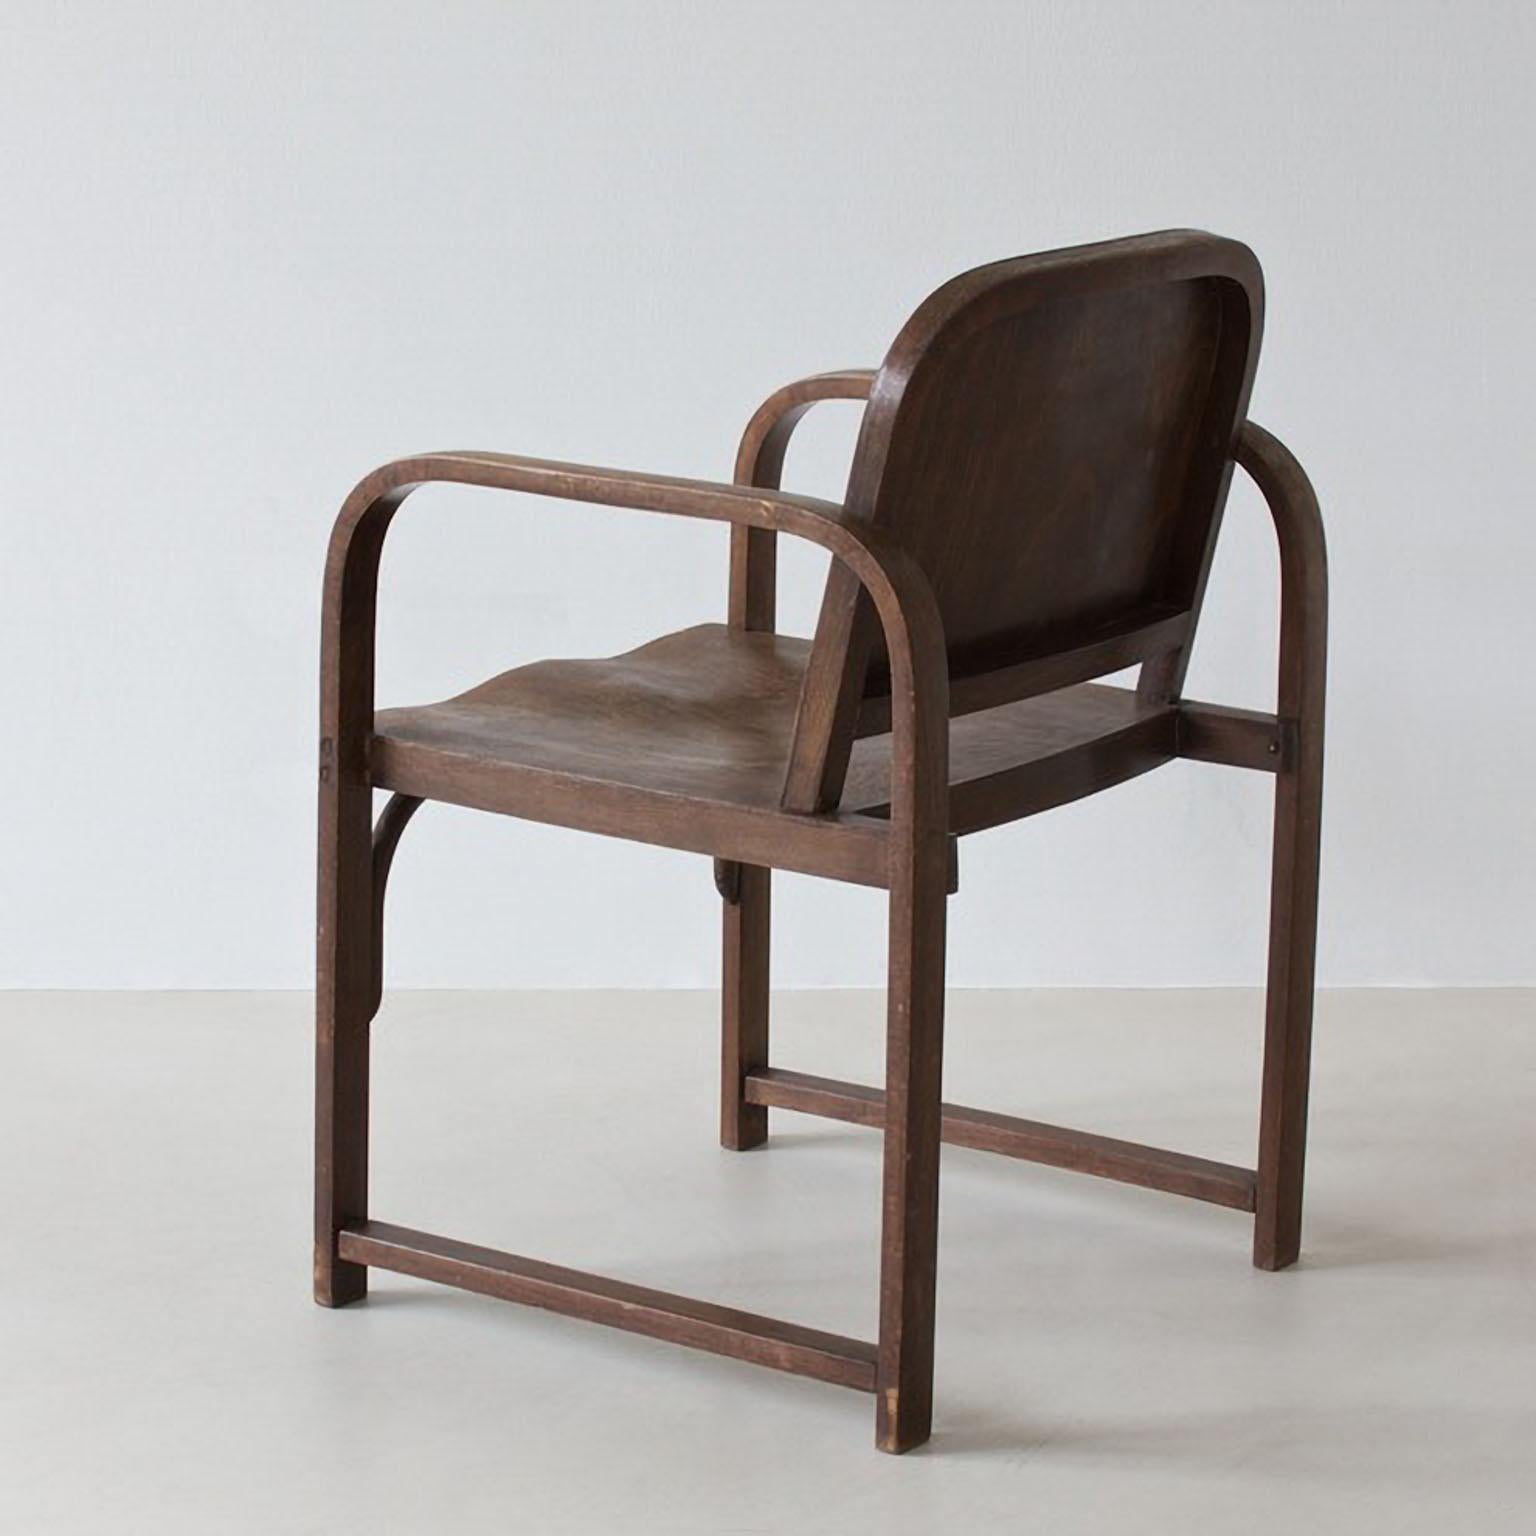 Modernist Thonet A 745/F Armchair manufactured by Tatra, Stained Wood, c. 1930 In Good Condition For Sale In Berlin, DE